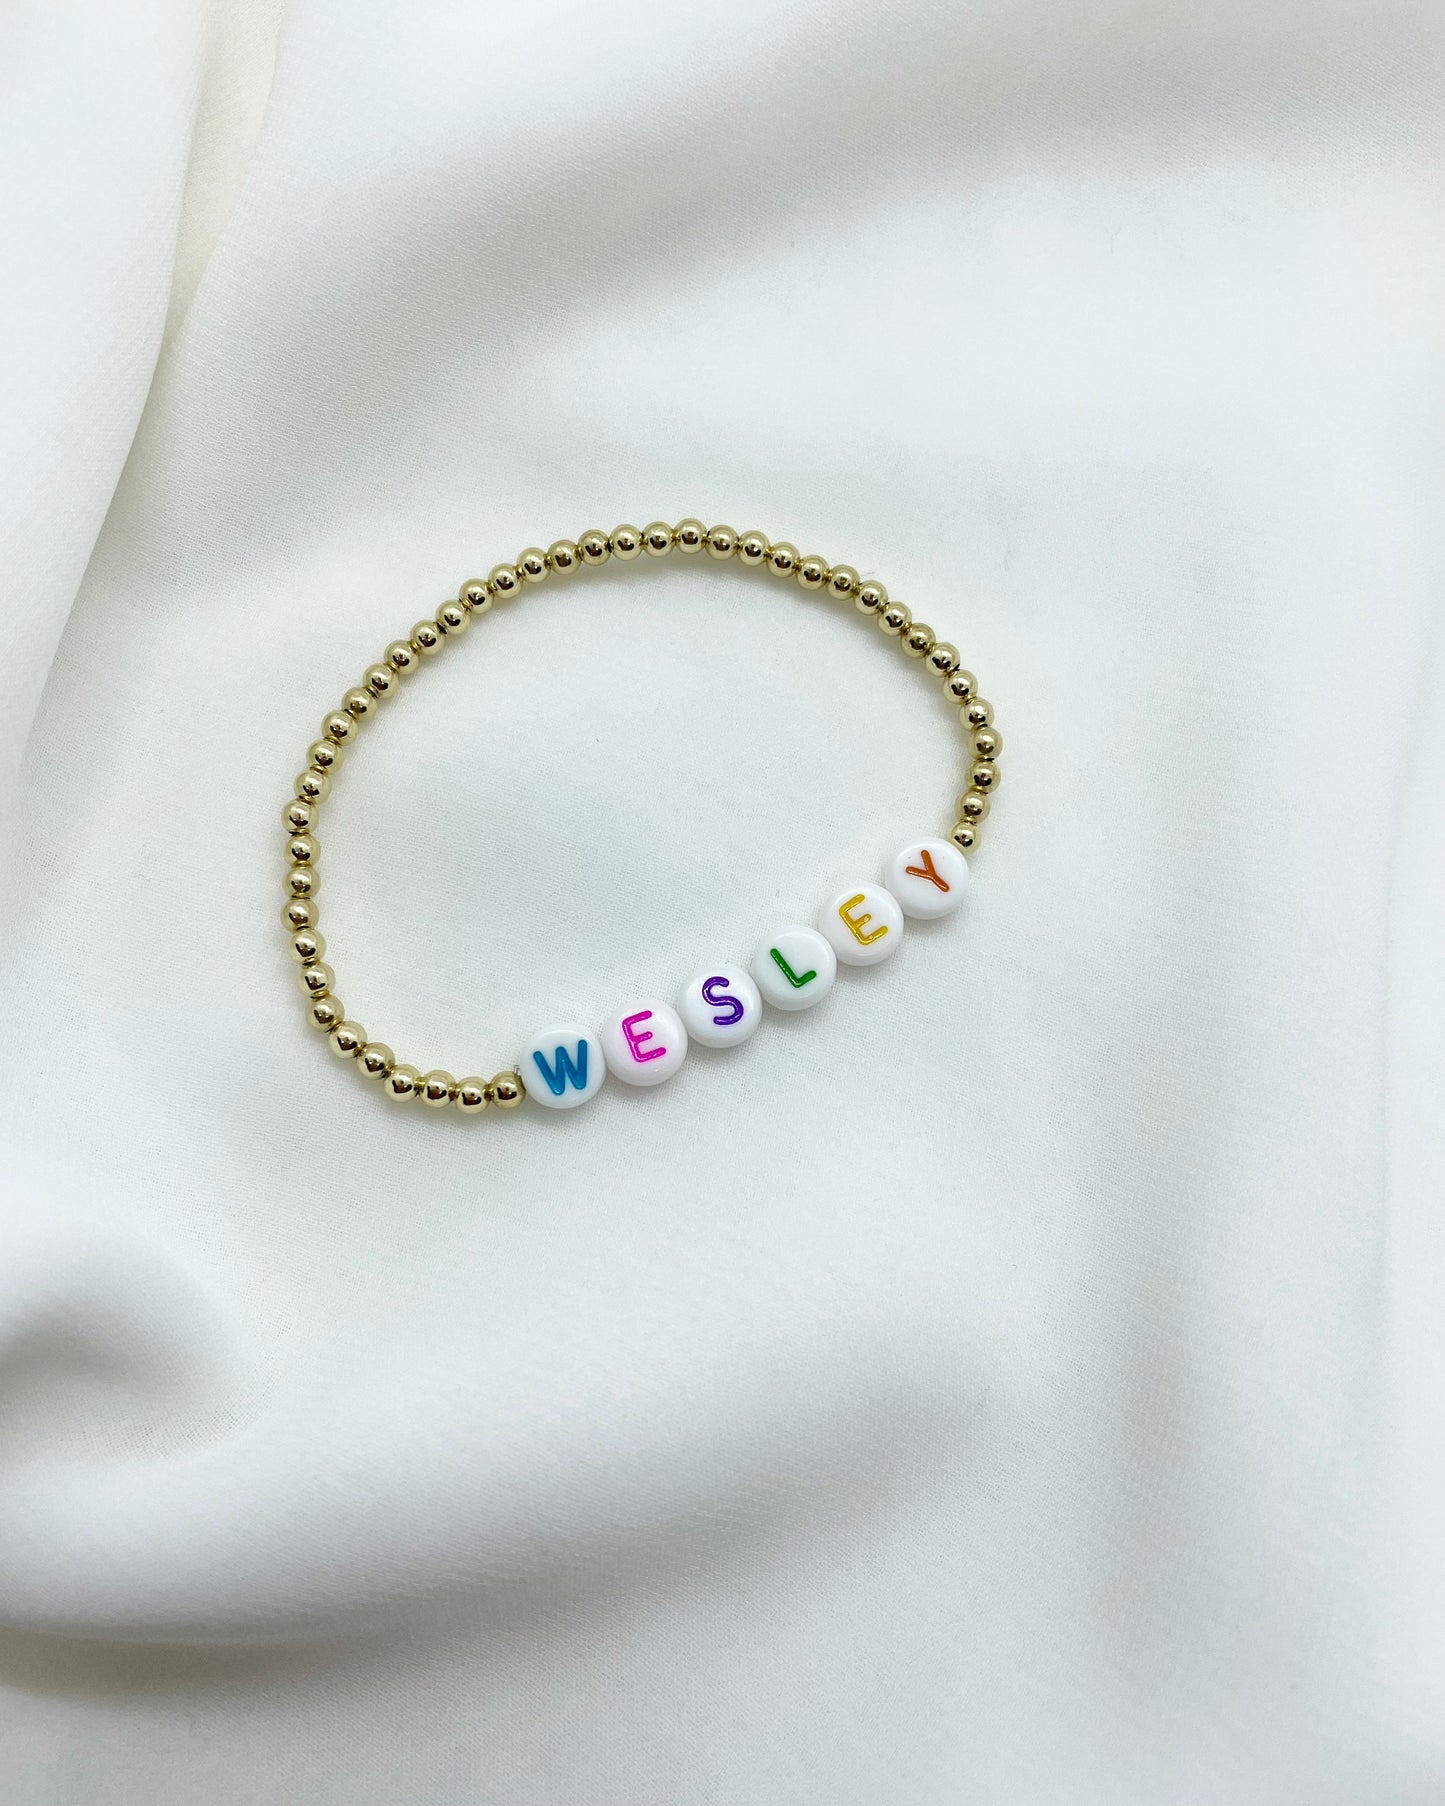 The Name Bracelet- Colorful Beads